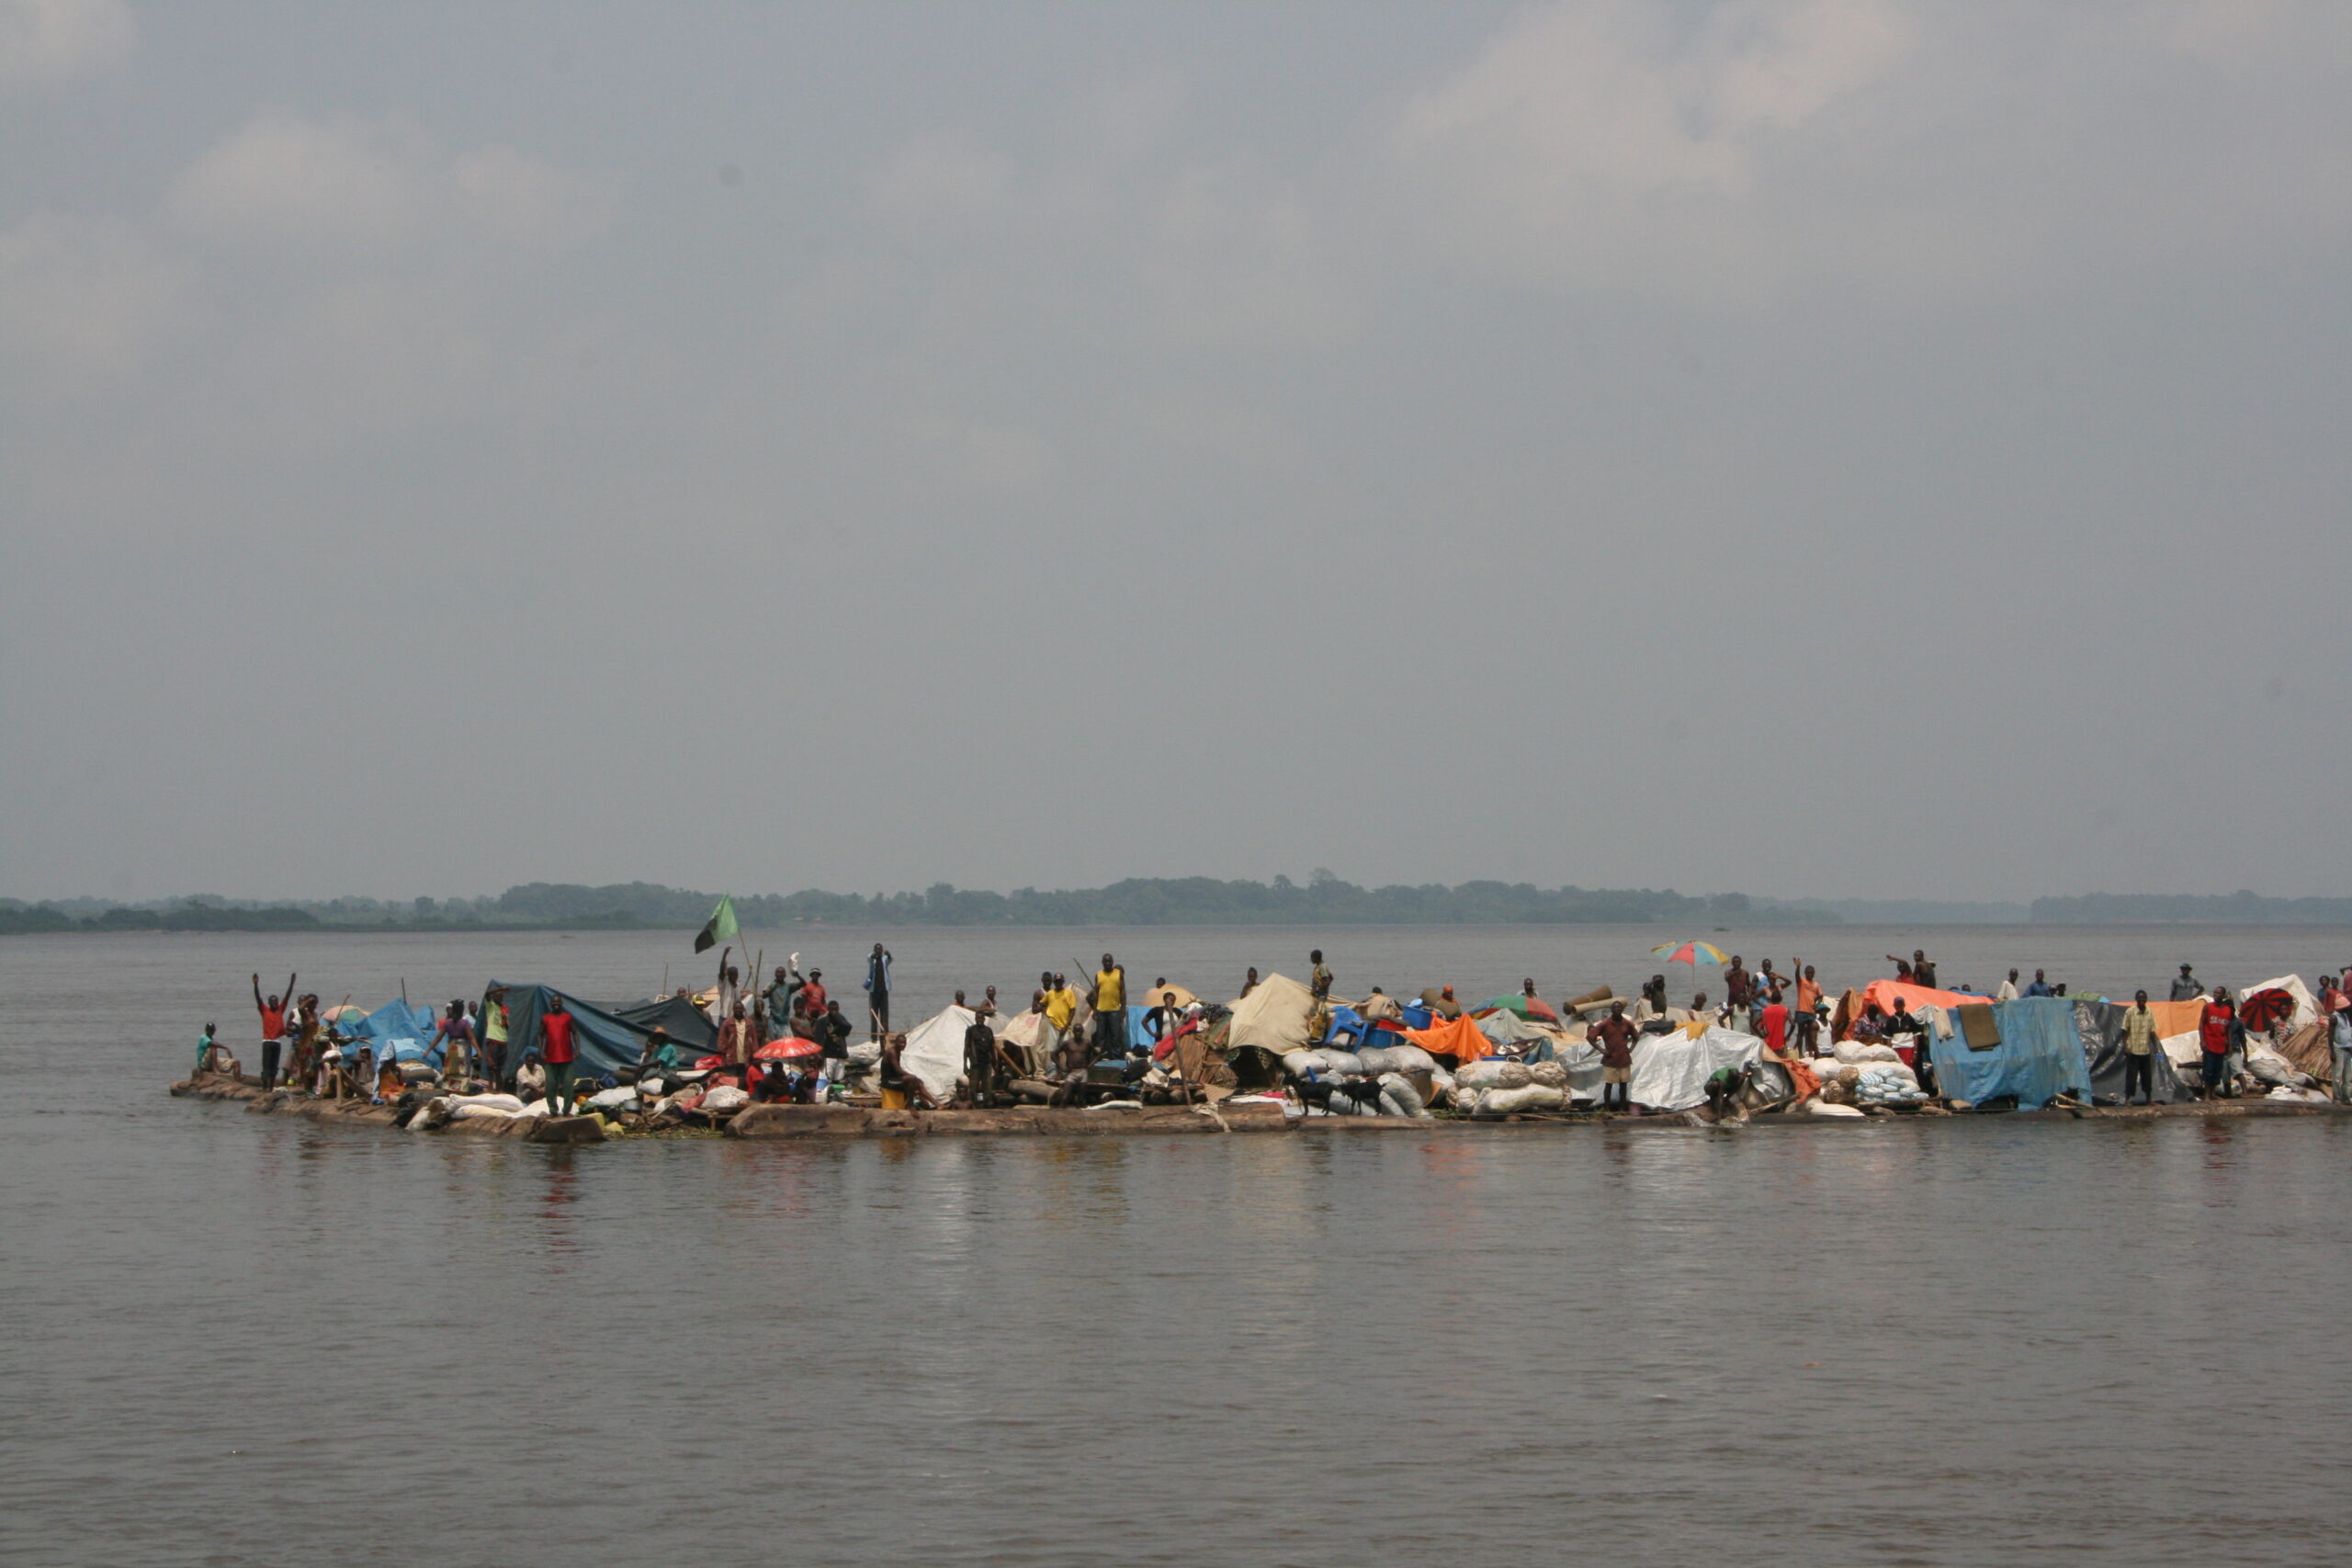 Boat with passengers, tents